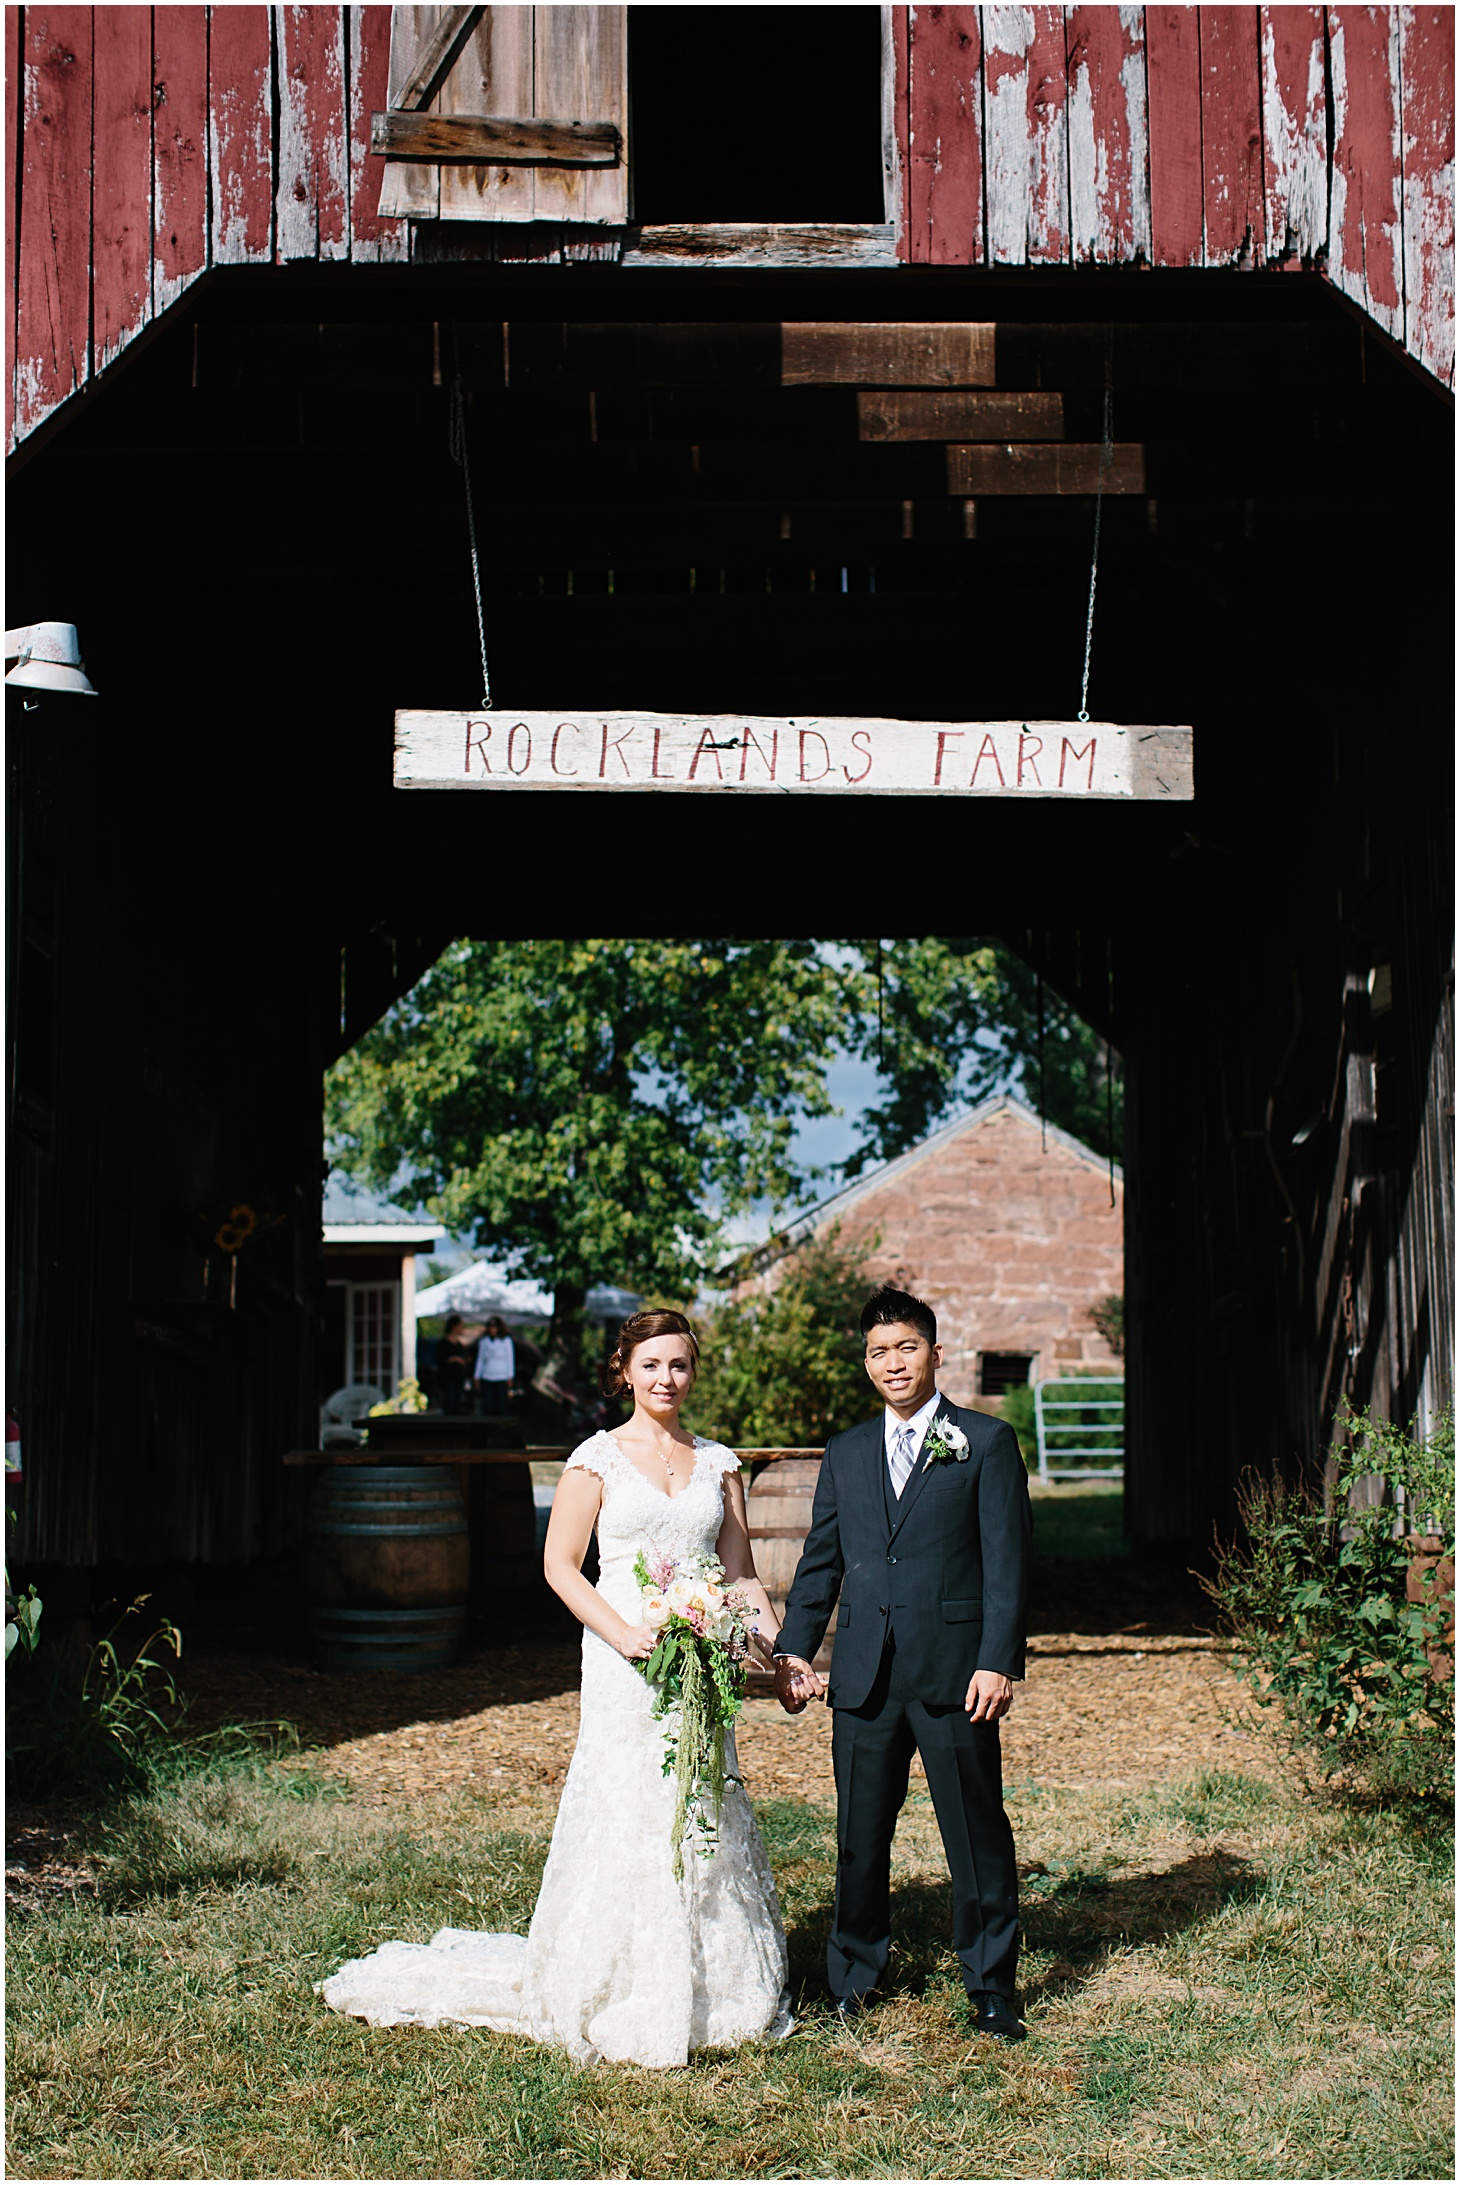 Rustic Floral Wedding at Rocklands Farm & Winery by Sarah Bradshaw Photography_0006